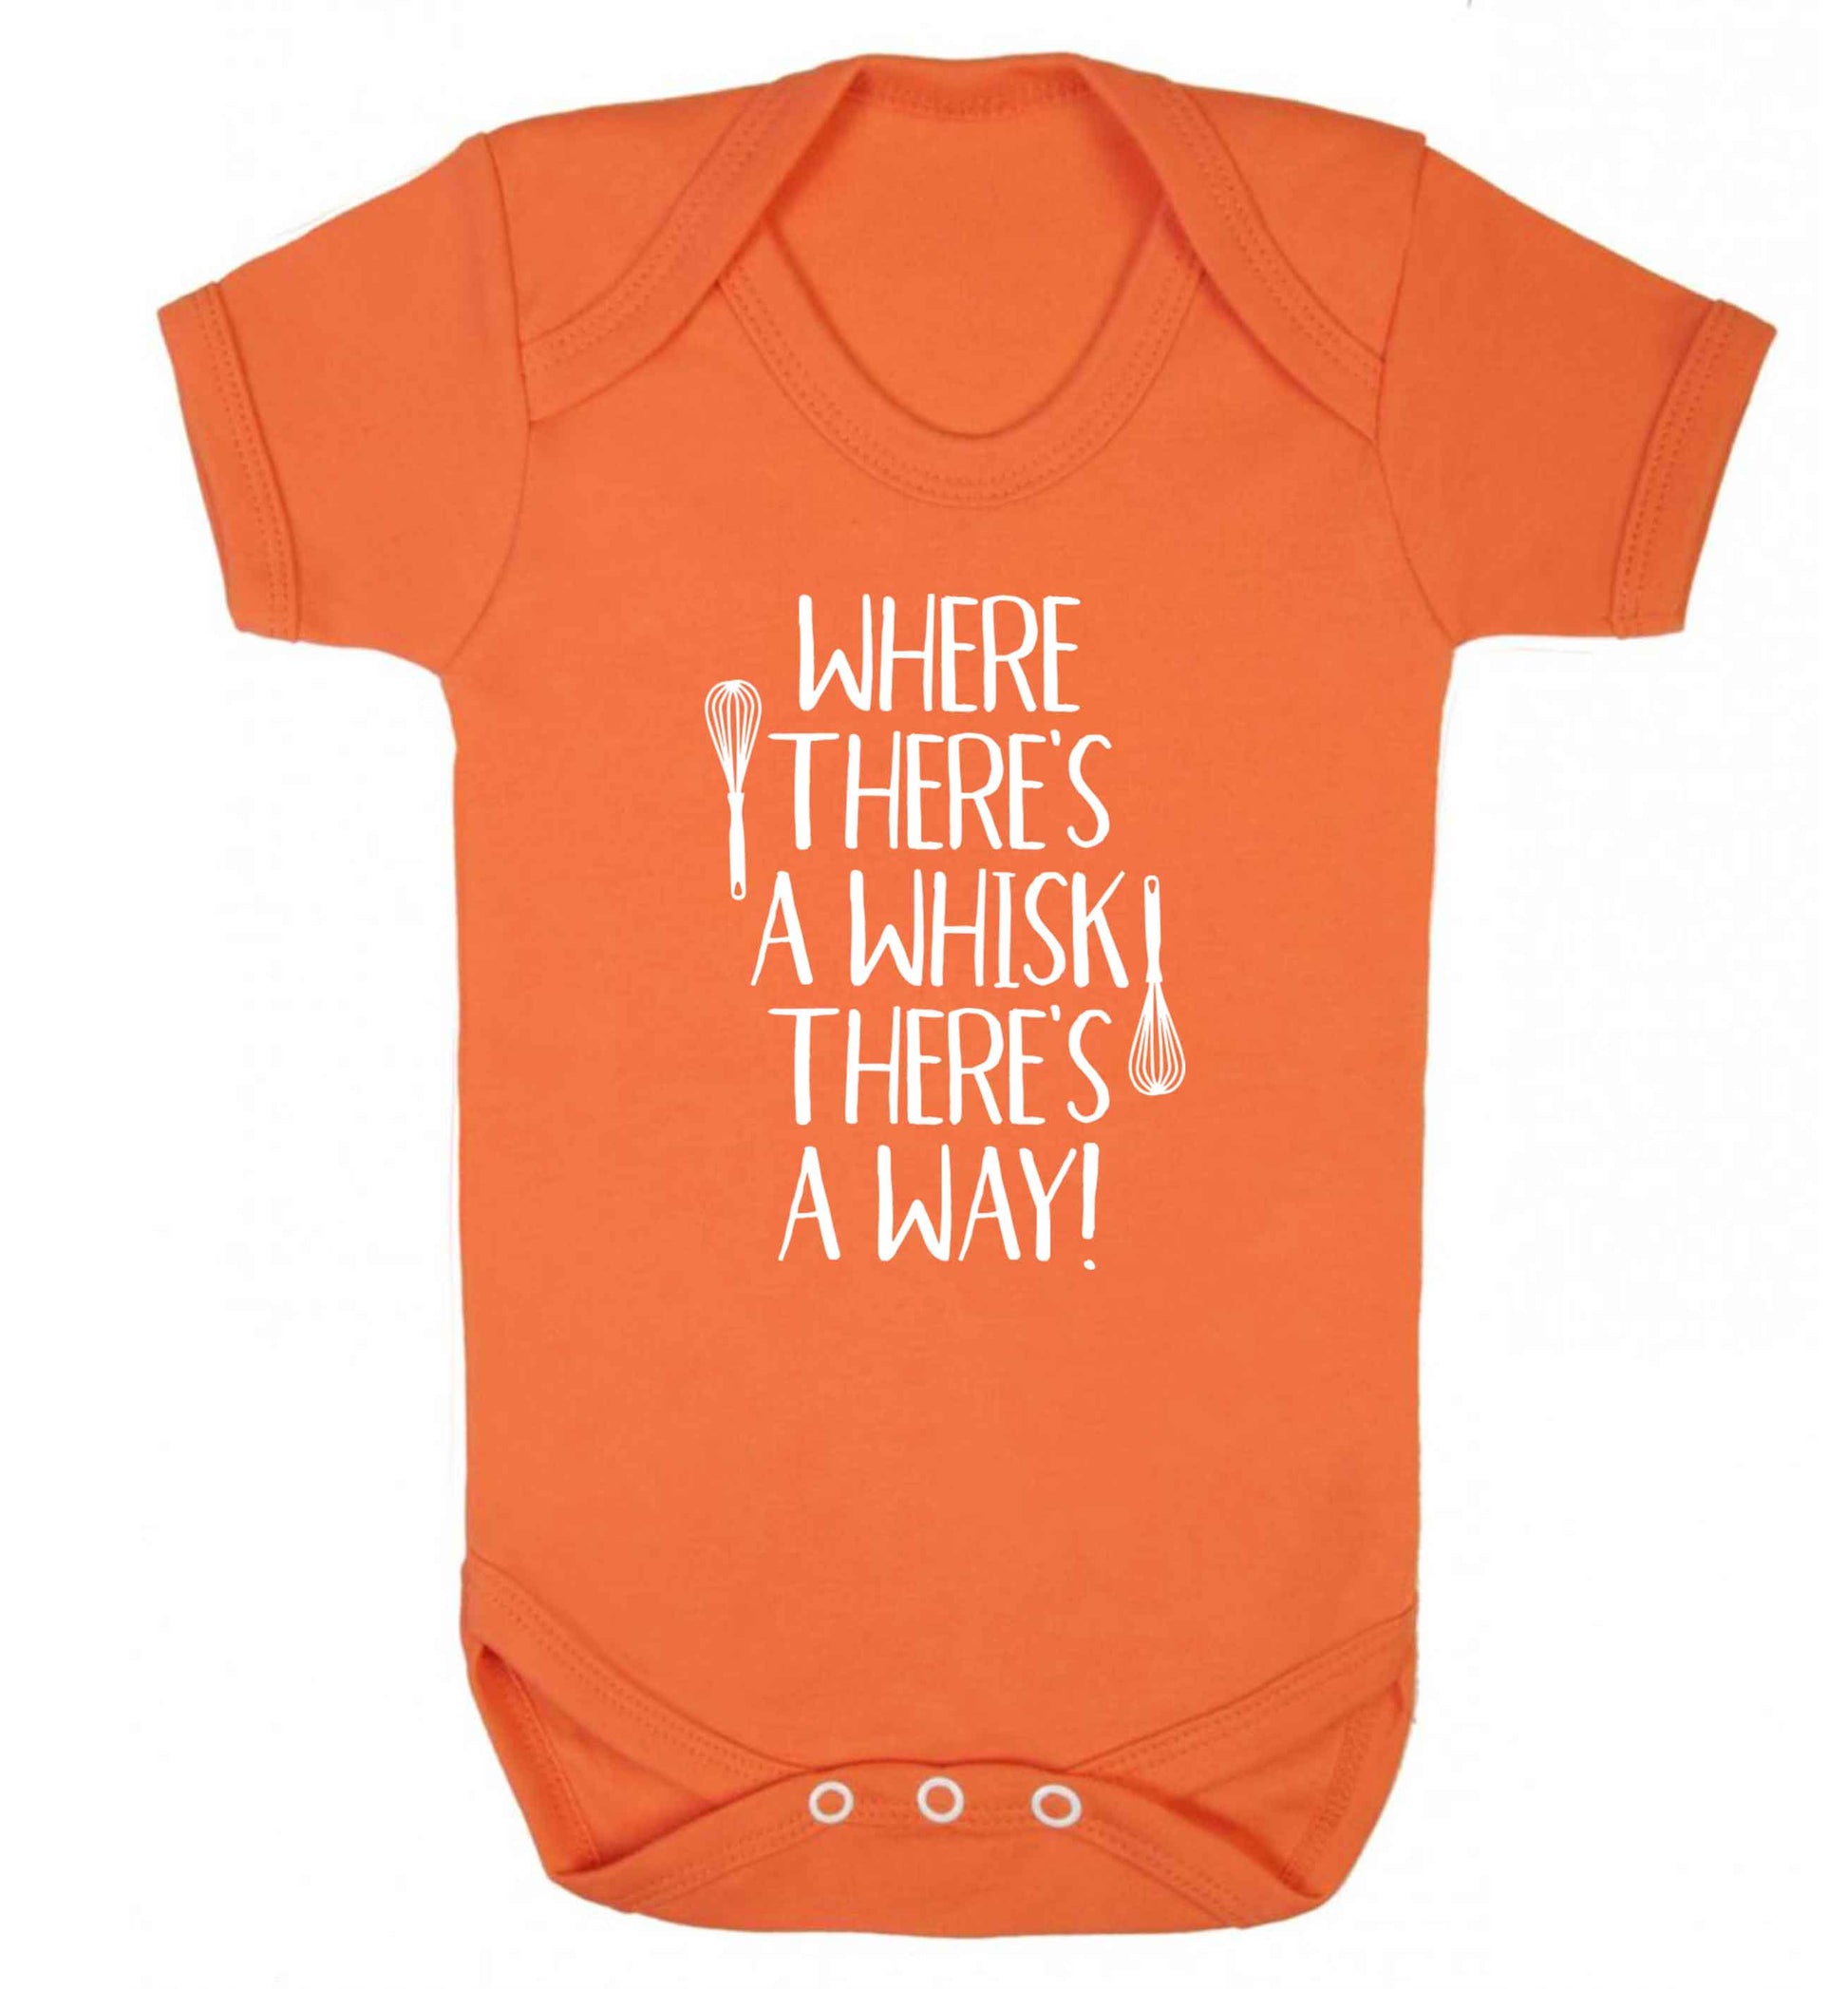 Where there's a whisk there's a way Baby Vest orange 18-24 months